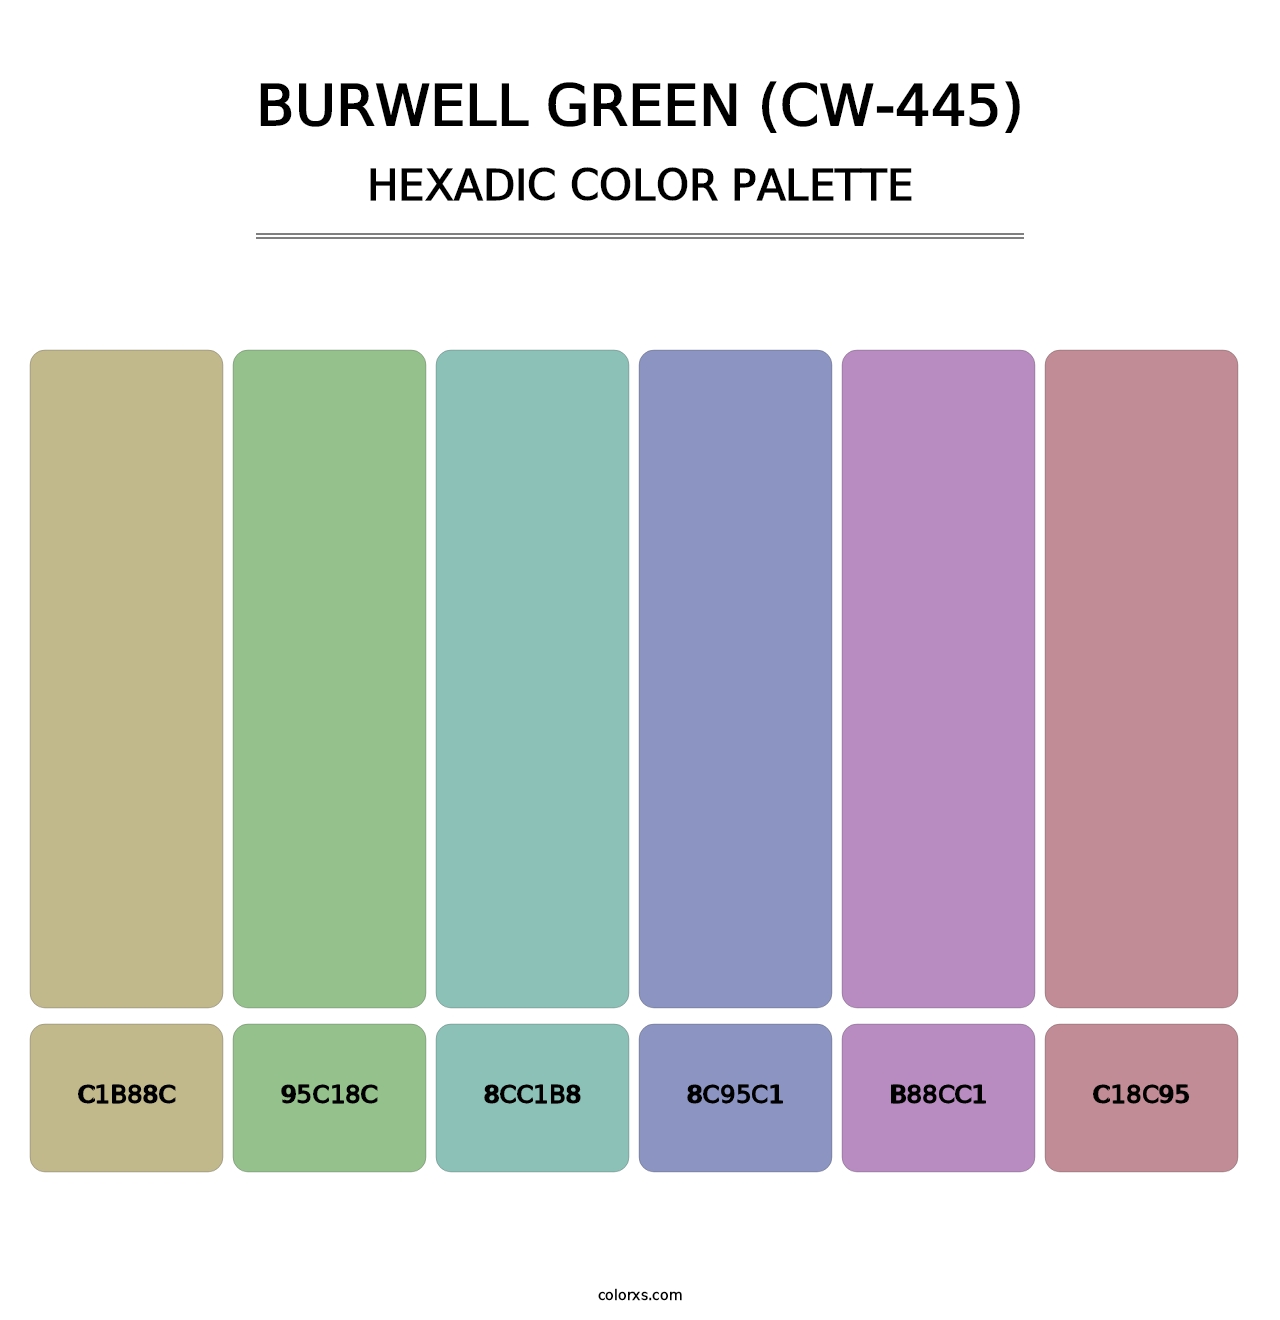 Burwell Green (CW-445) - Hexadic Color Palette